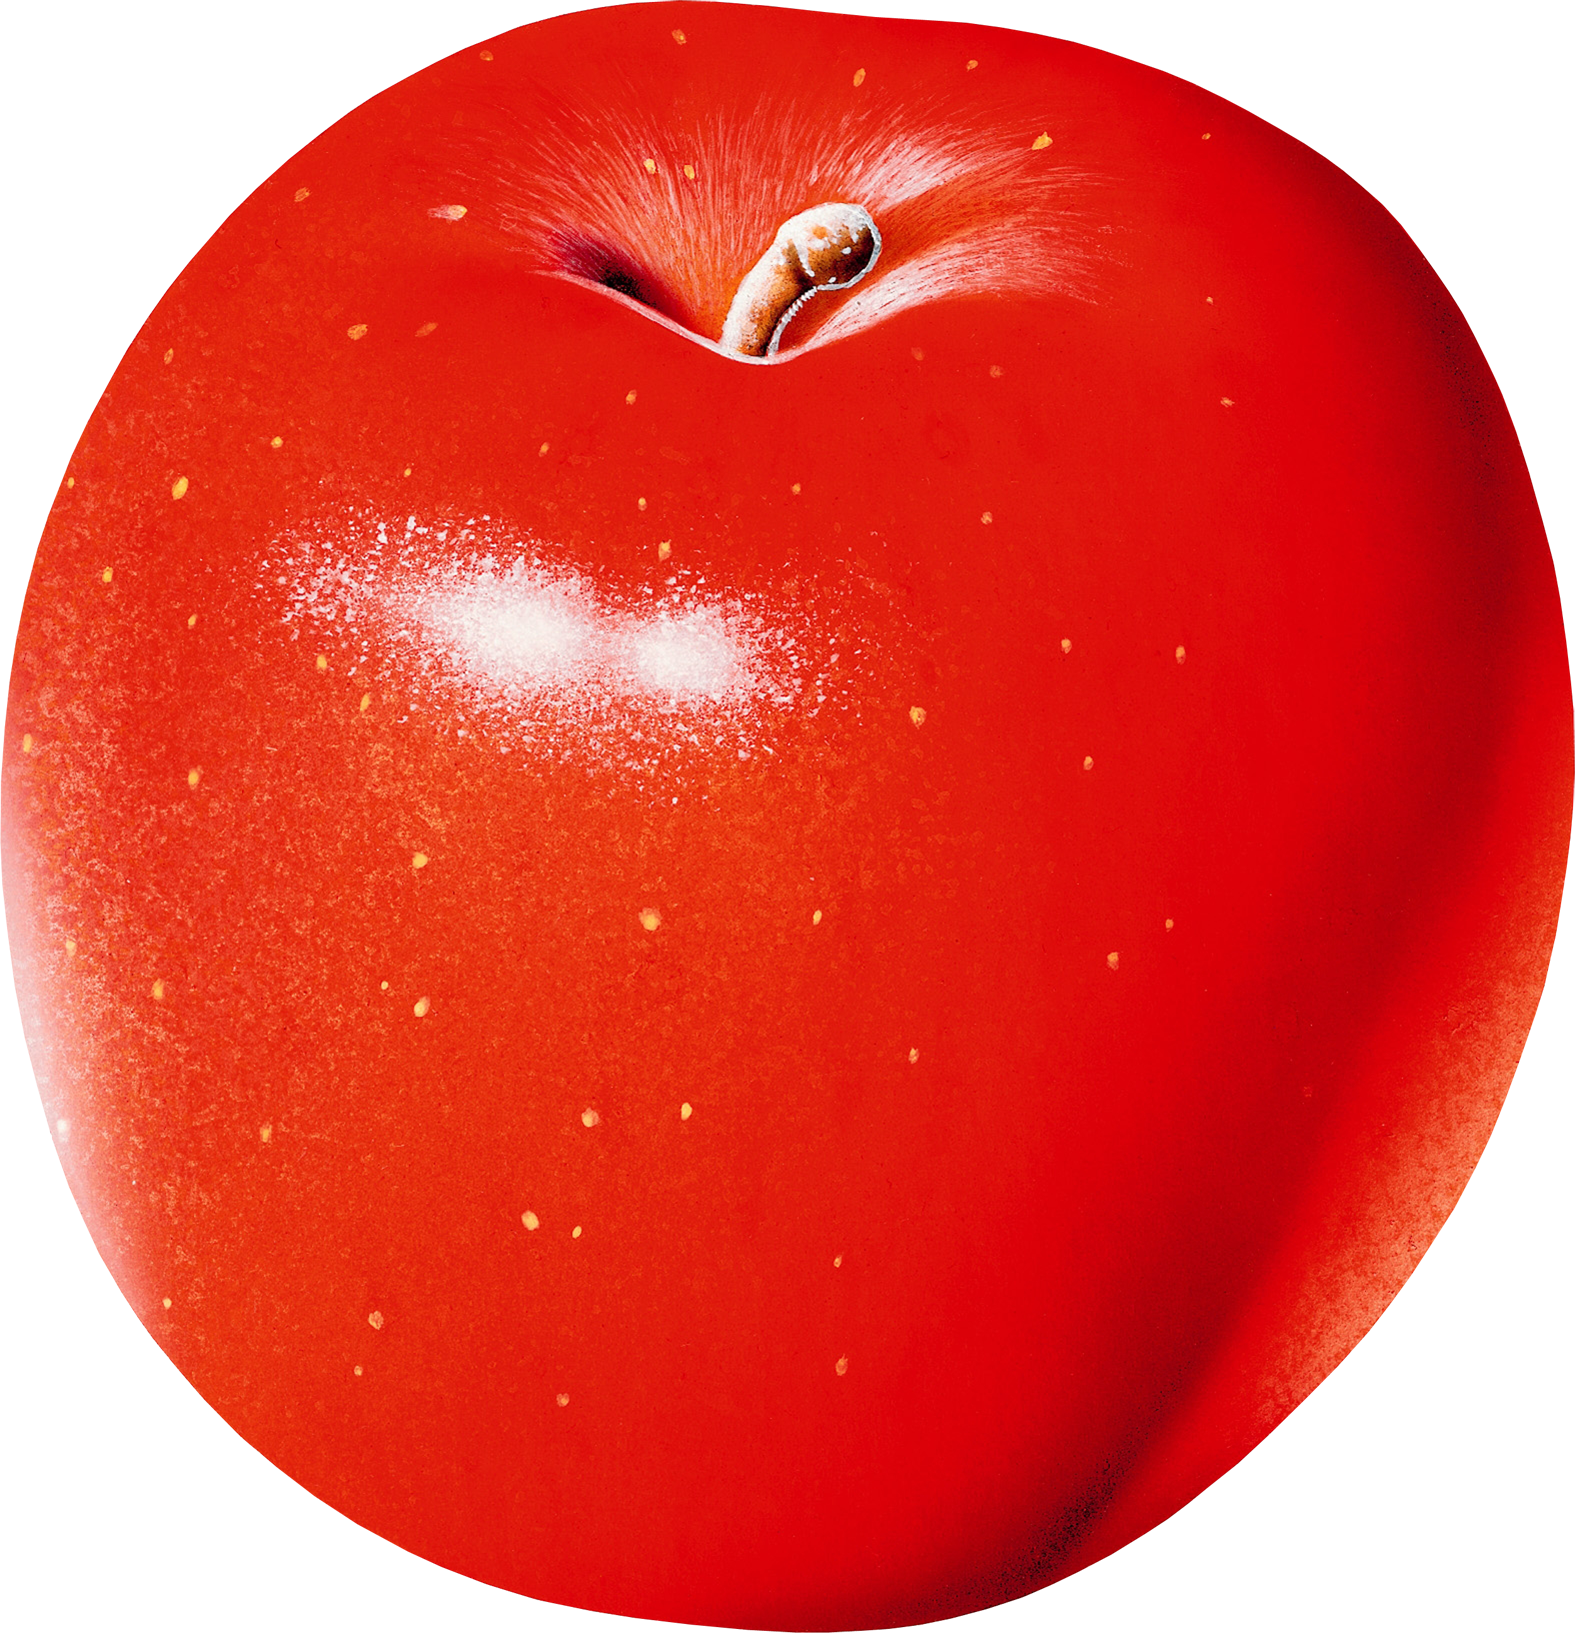 Red Apple's PNG Image